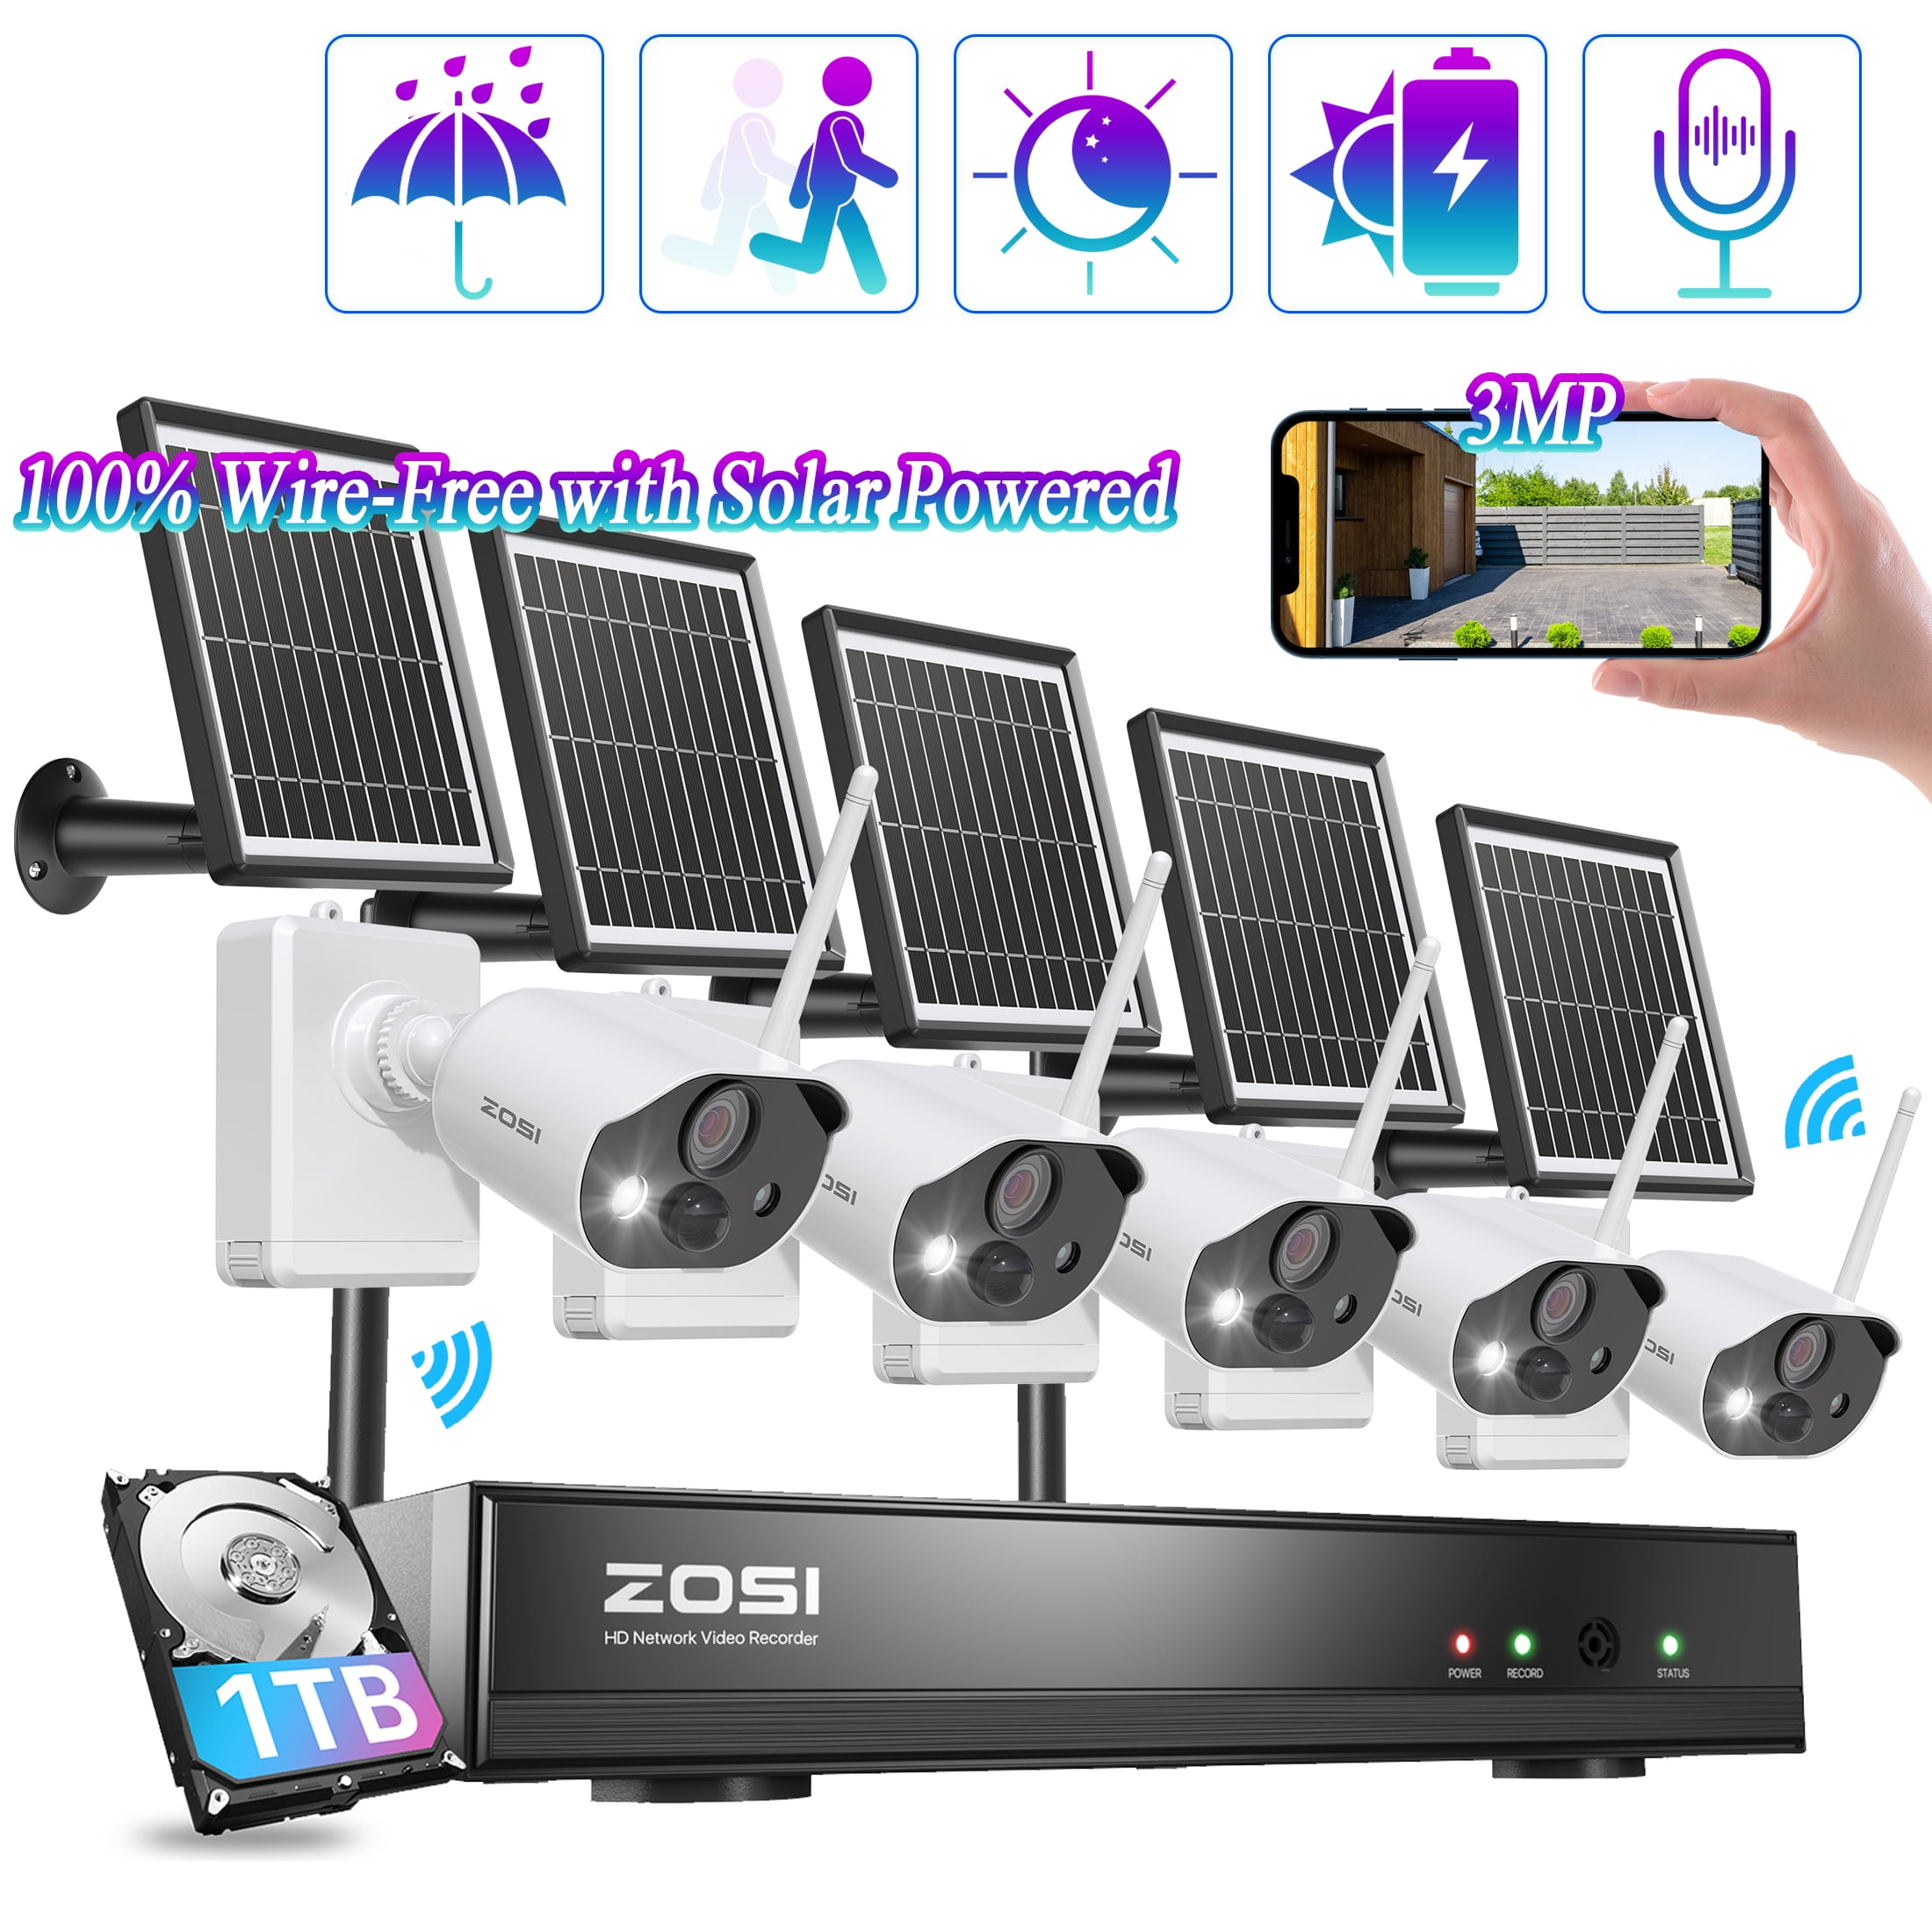 ZOSI 3MP Battery Powered Wireless Security Camera System, 8CH Home Security  with Solar Panel，5pcs 100% Wire-Free Outdoor WiFi Surveillance Camera  Built-in Mic, Color Night Vision, 1TB HDD